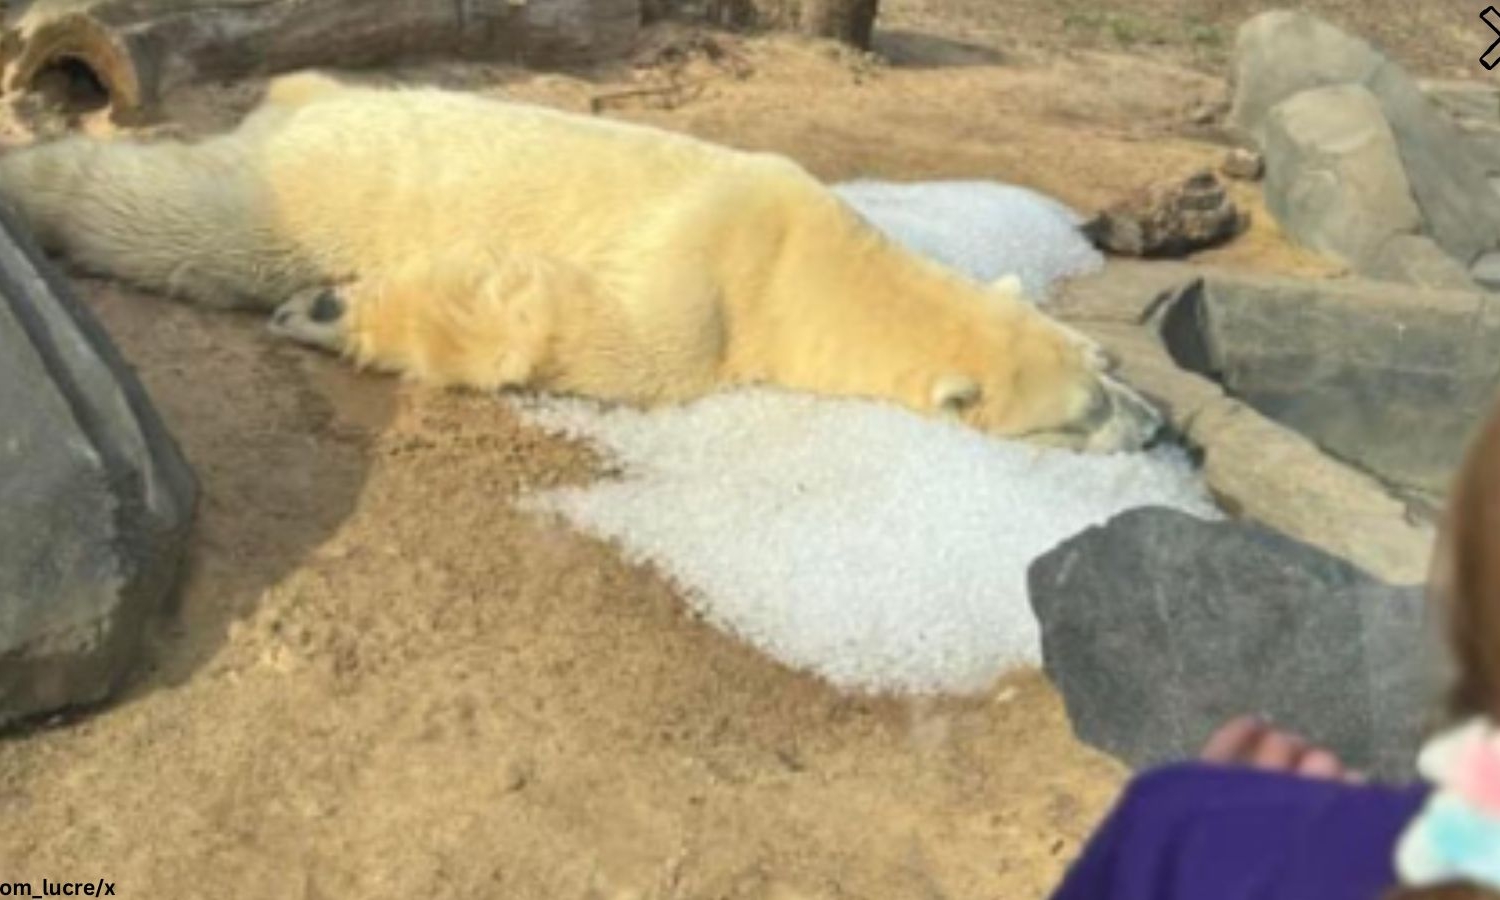 Concerns Raised as Photo of Polar Bear at US Zoo Sparks Questions